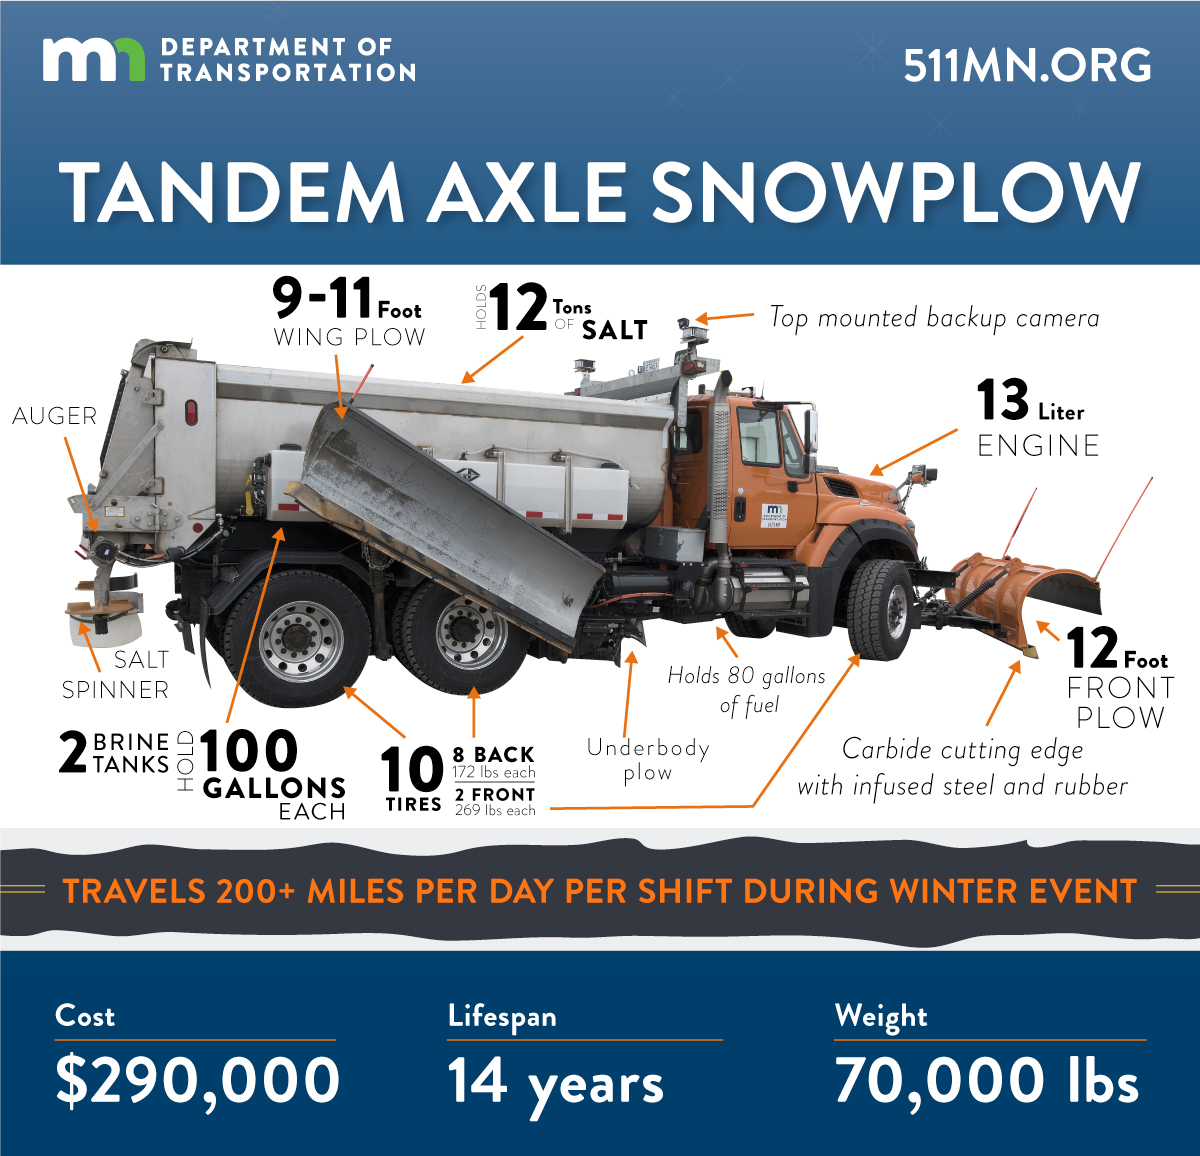 A tandem axle snowplow travels 200+ miles per day per shift during a winter event. It costs $290,000, has a lifespan of 14 years and weighs 70,000 pounds